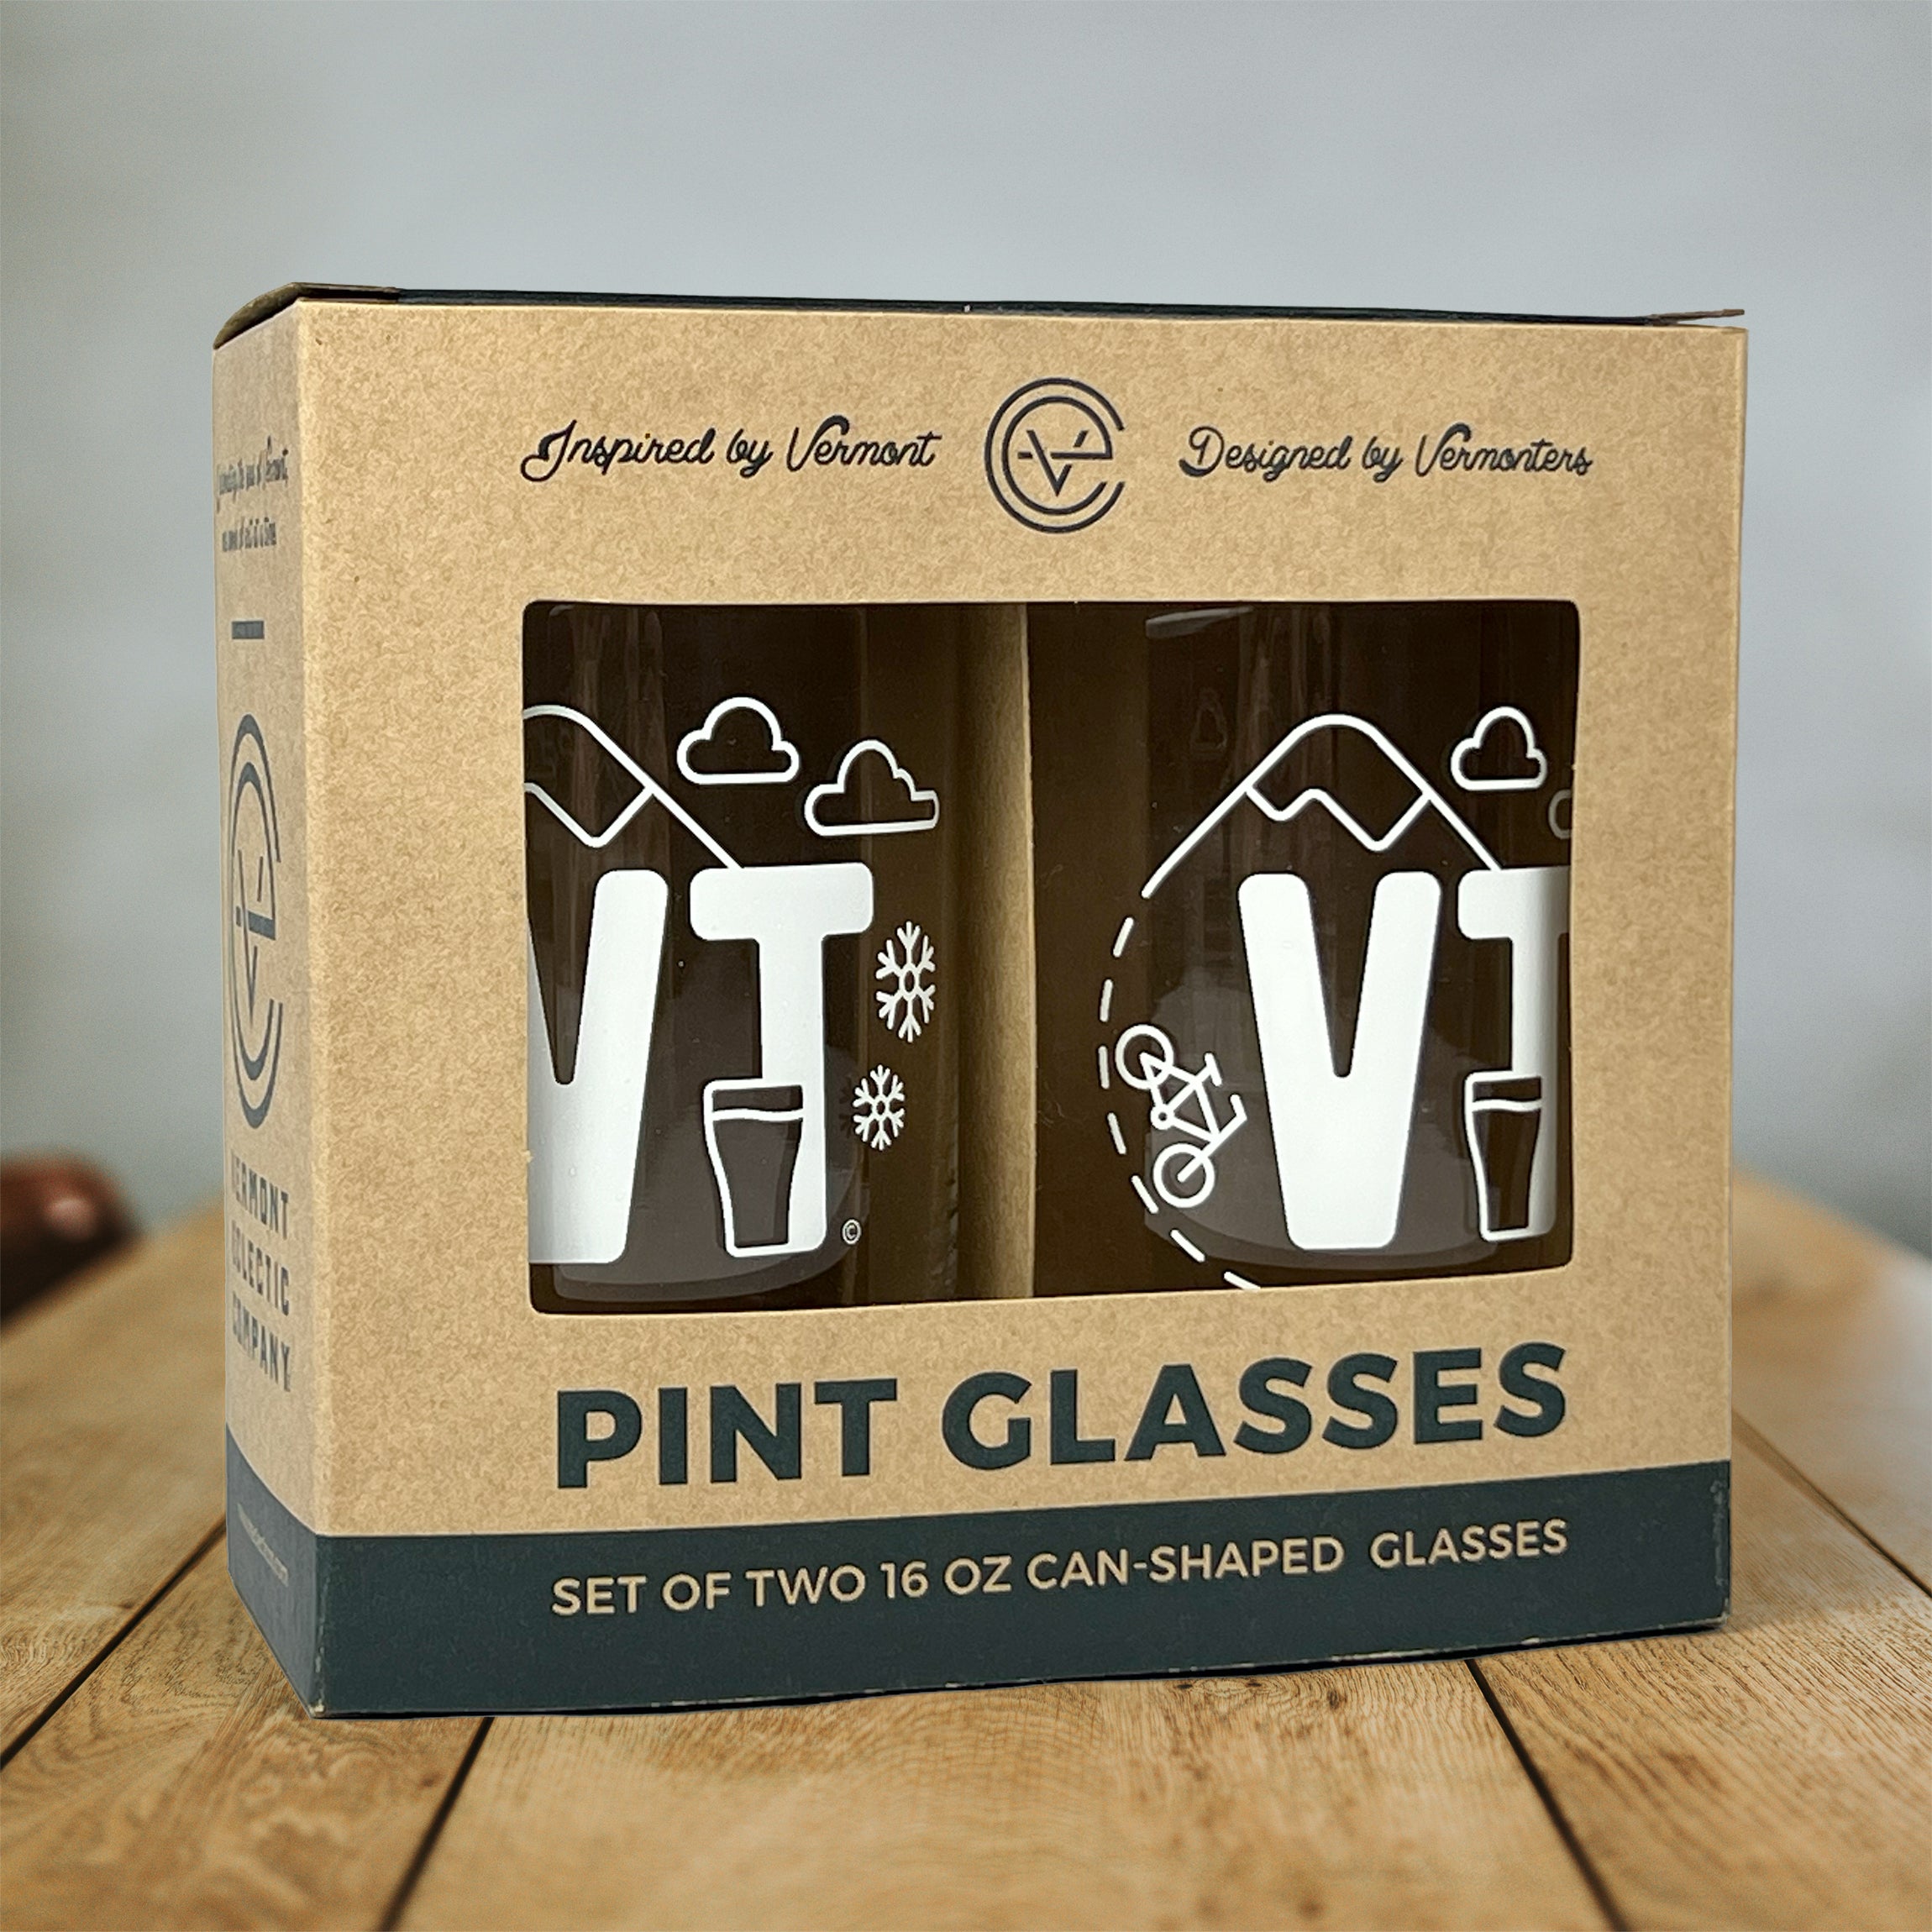 Vermont Eclectic Company beer can pint glasses in box